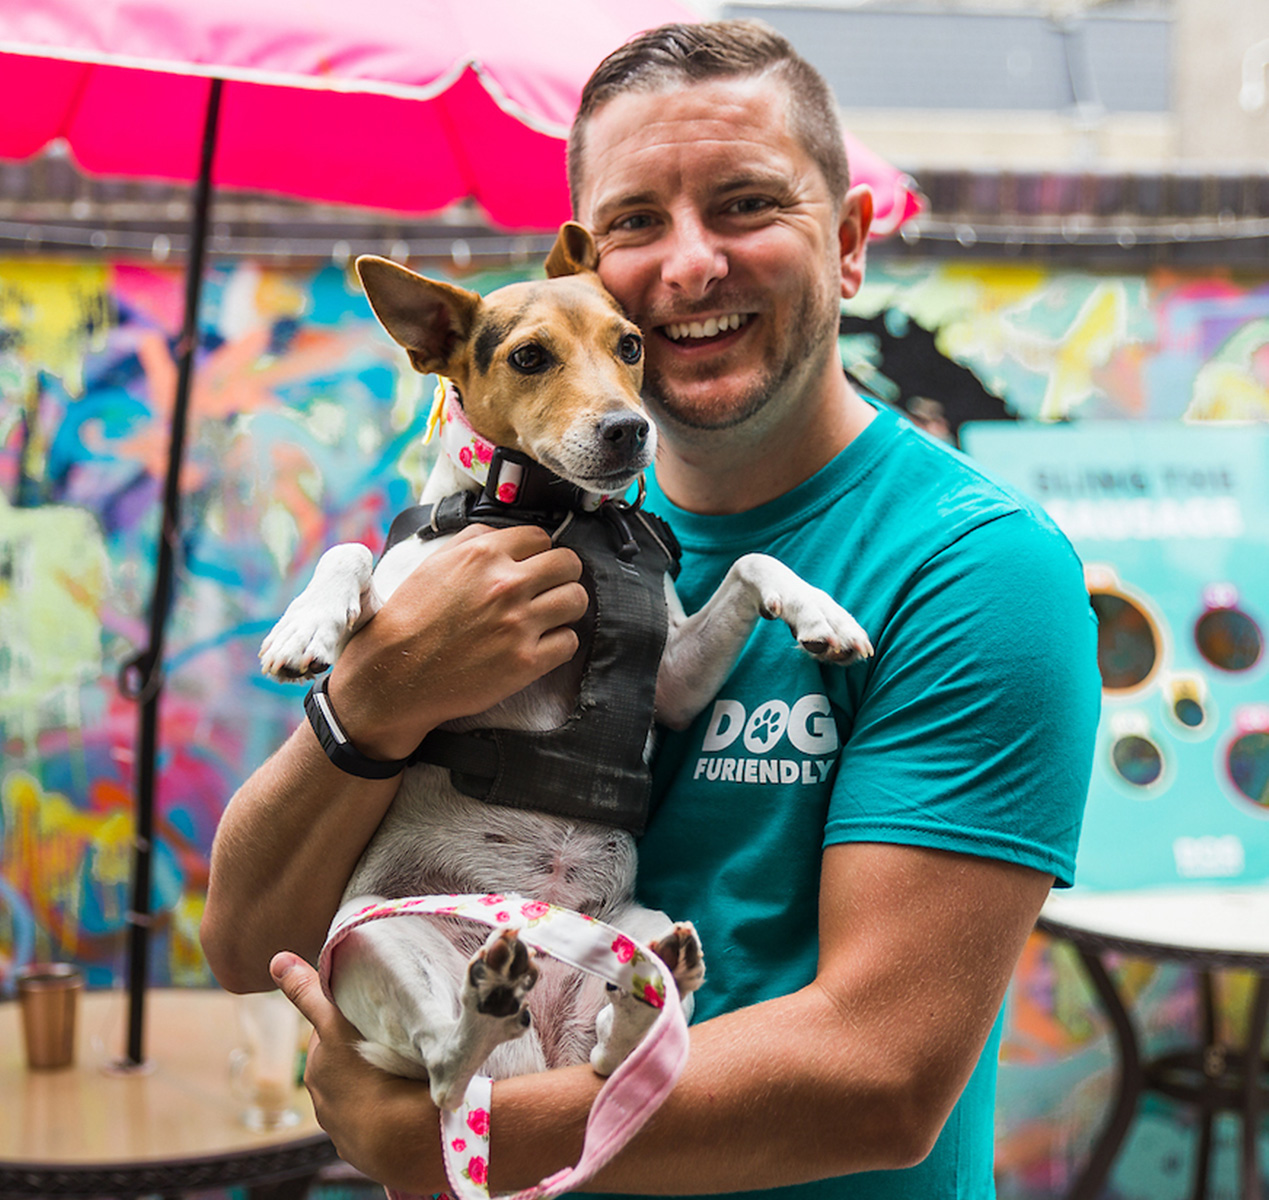 A man smiling, holding a dog in his arms.